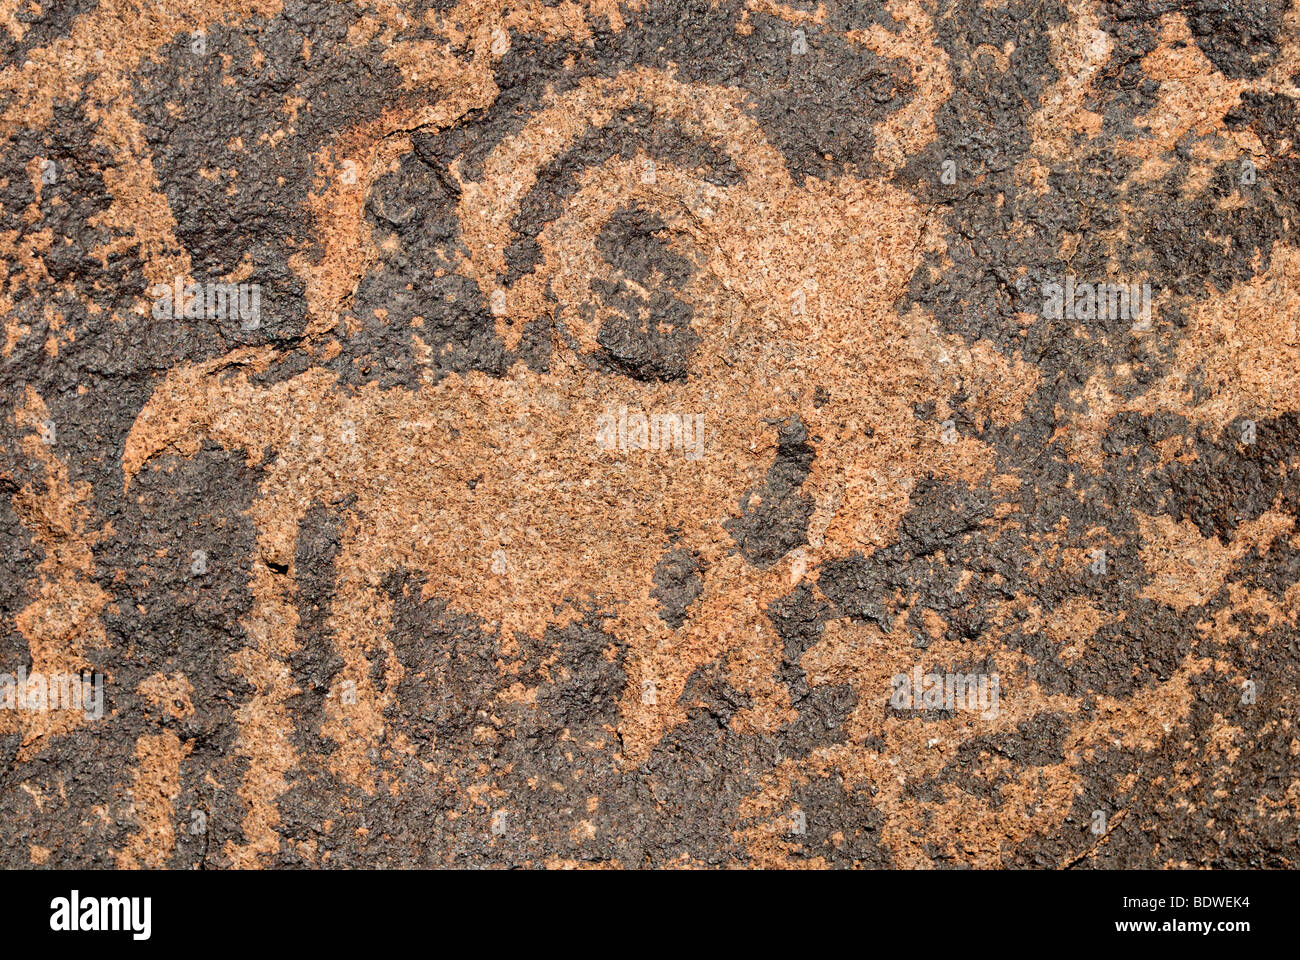 Native American engraving, petroglyphs, animal depiction, about 1000 years old, Painted Rock Petroglyph Site, Painted Rocks Sta Stock Photo